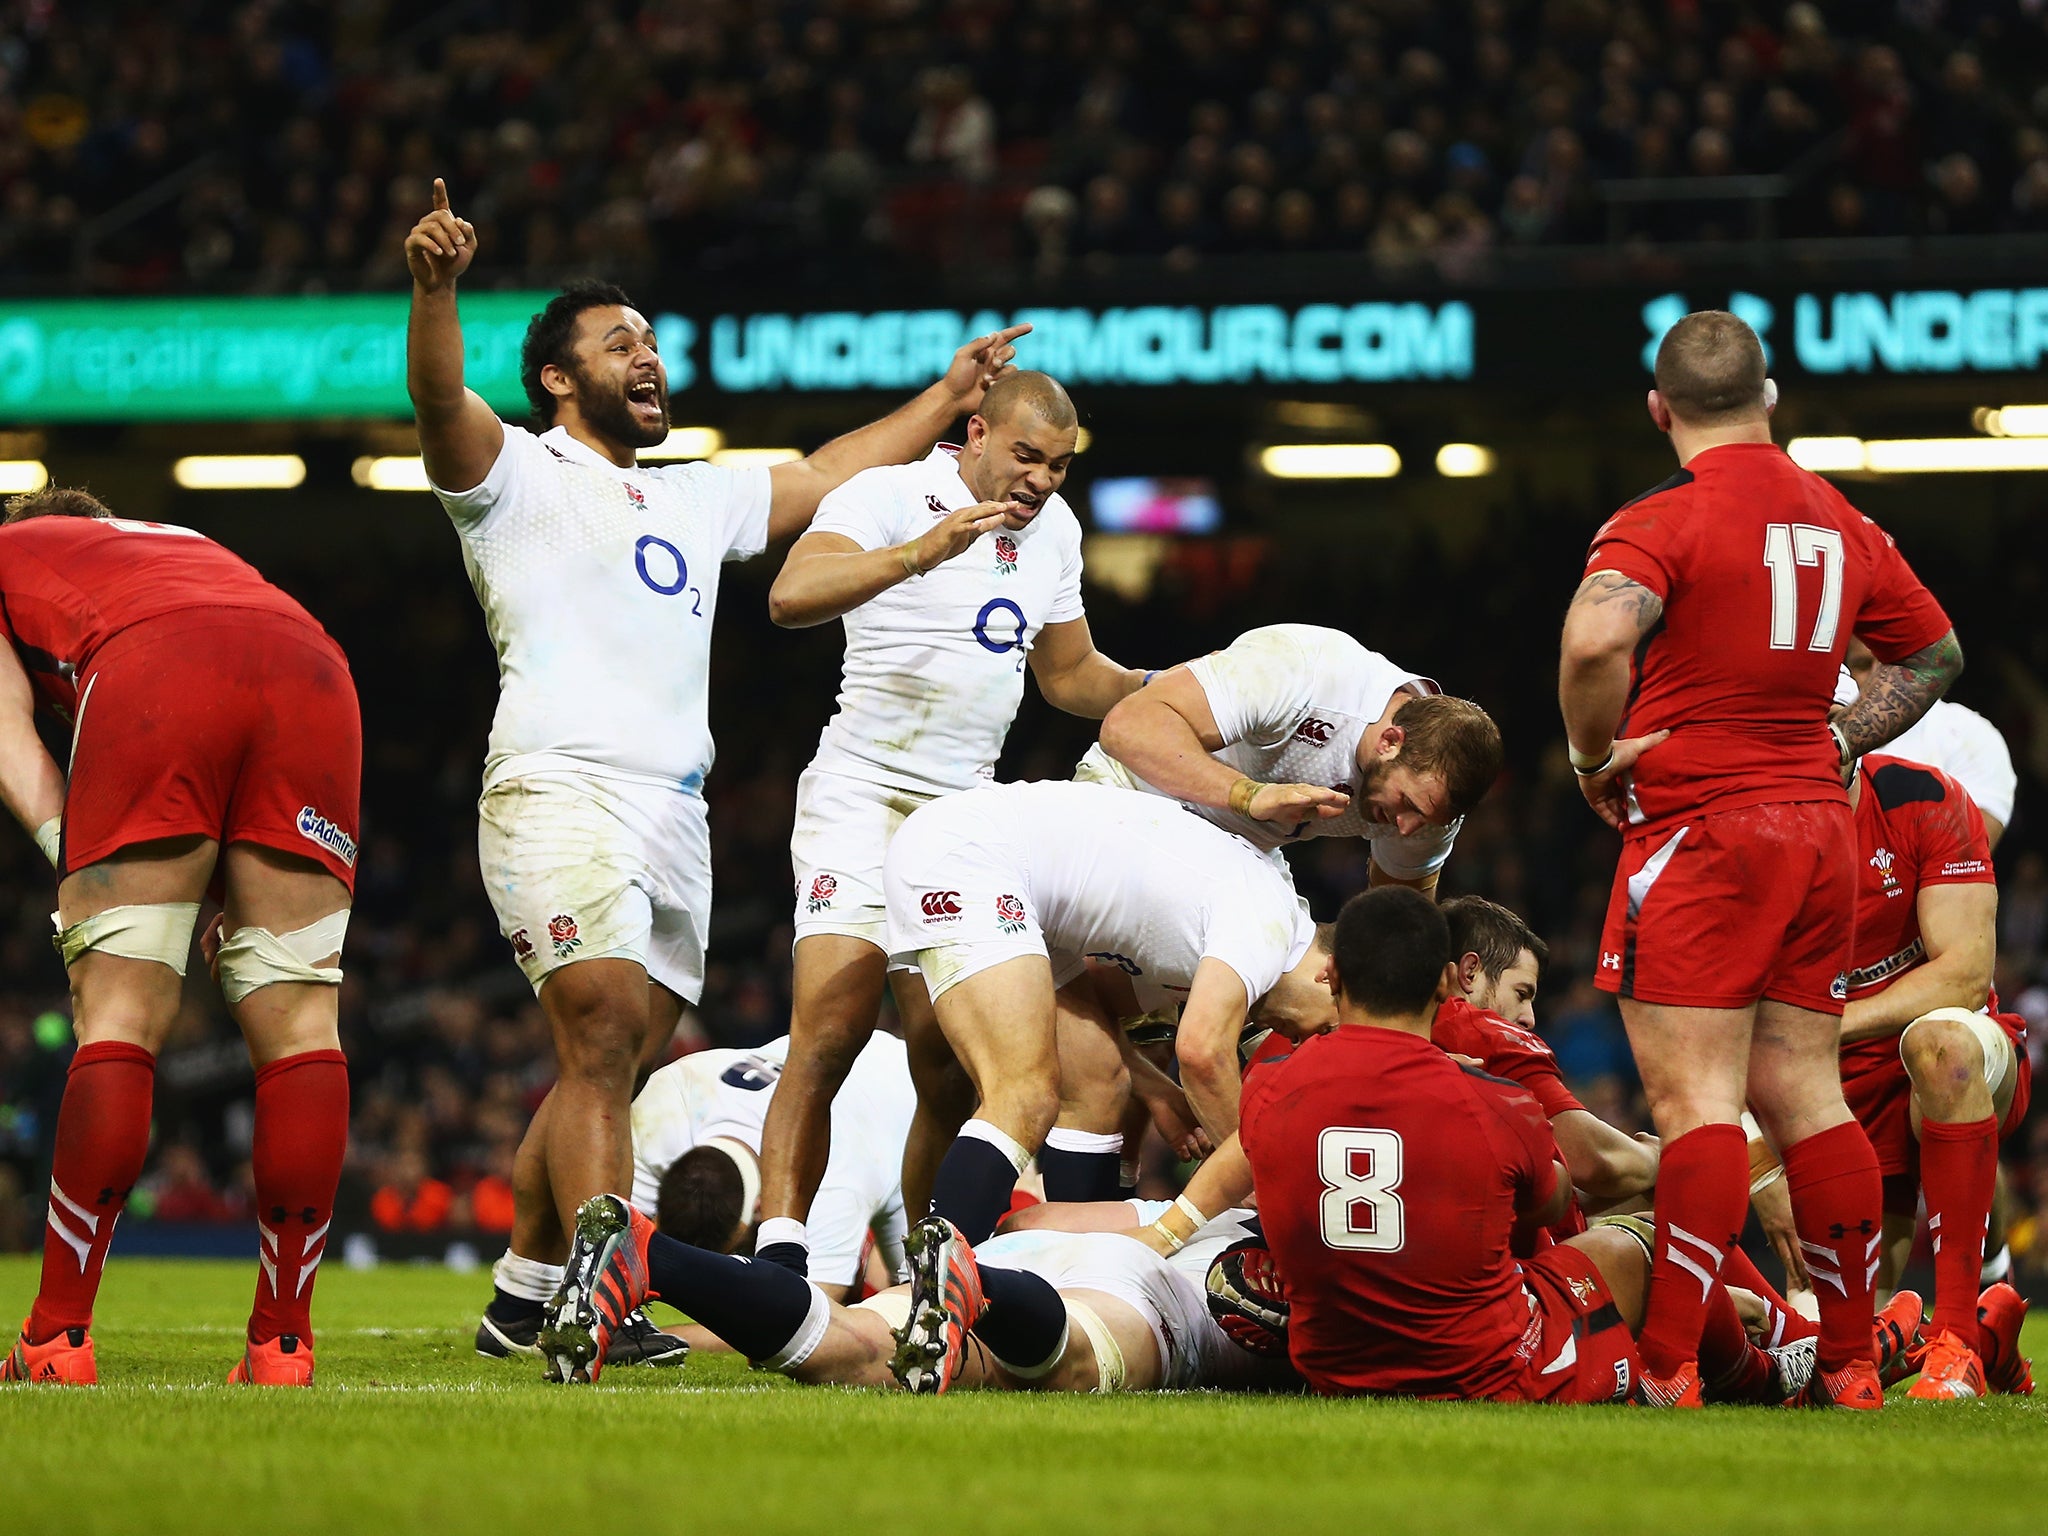 Billy Vunipola of England celebrates a try which was later ruled out